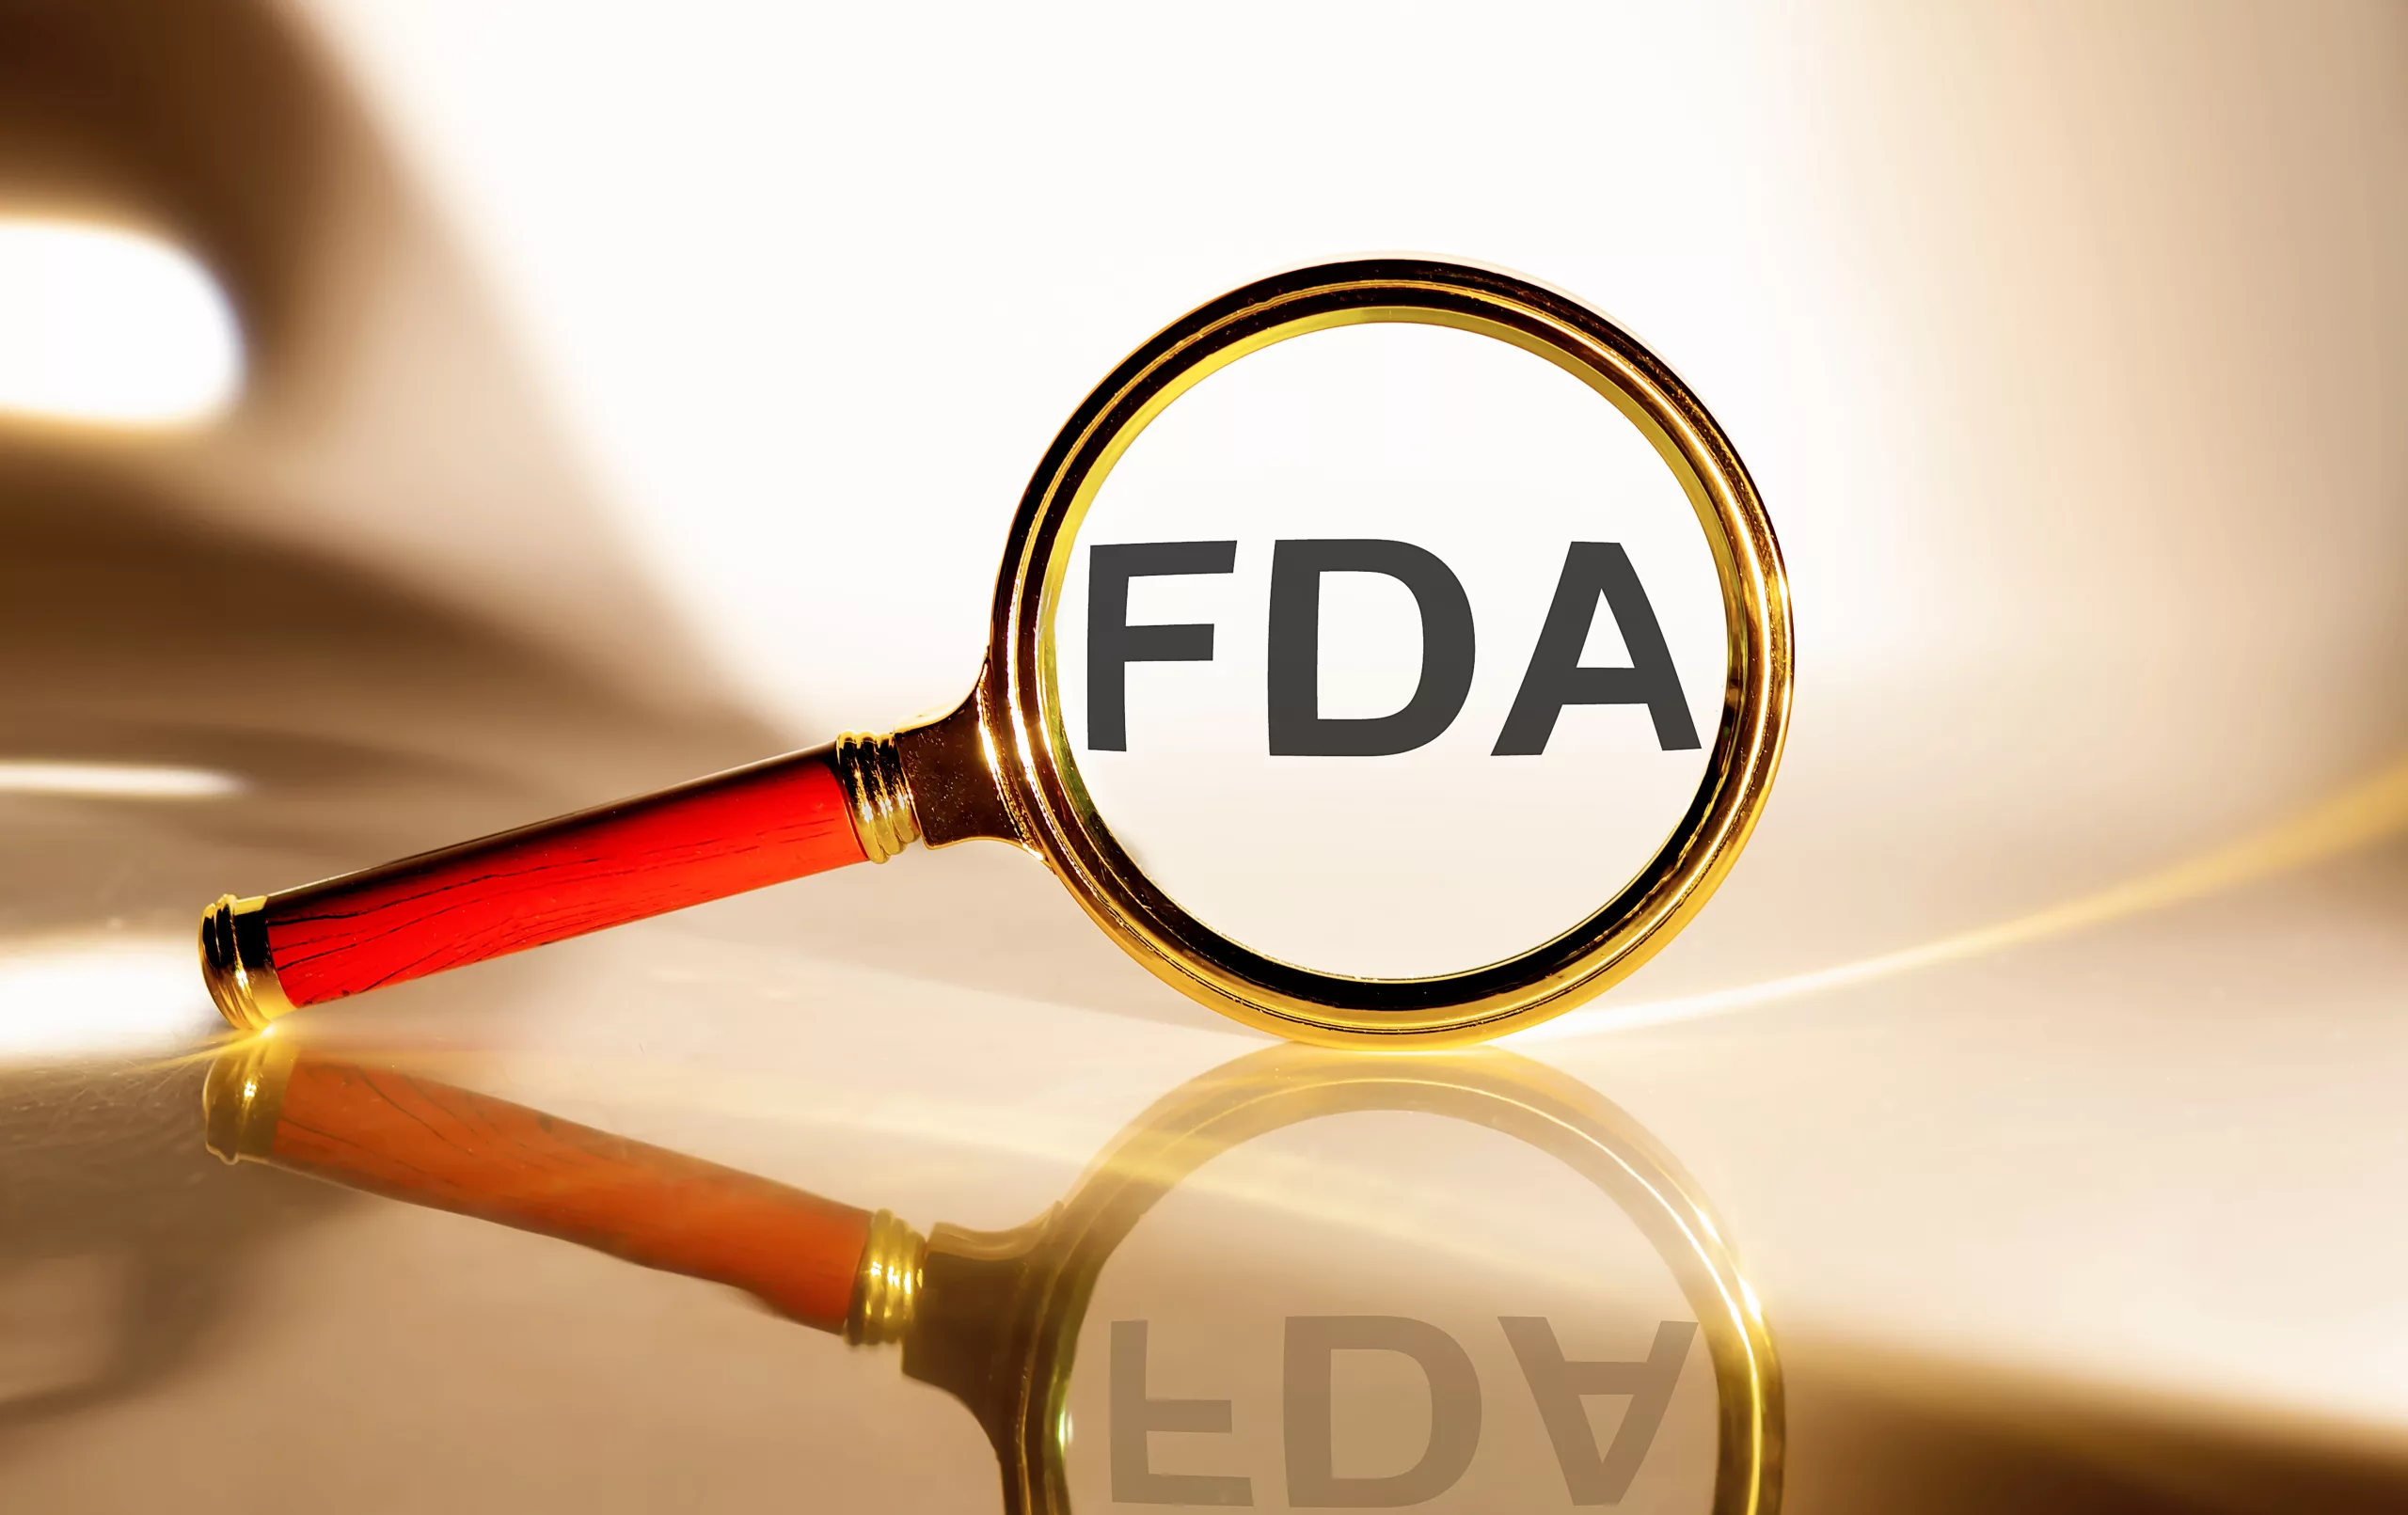 FDA concept. Magnifier glass with text on white background in sunlight.